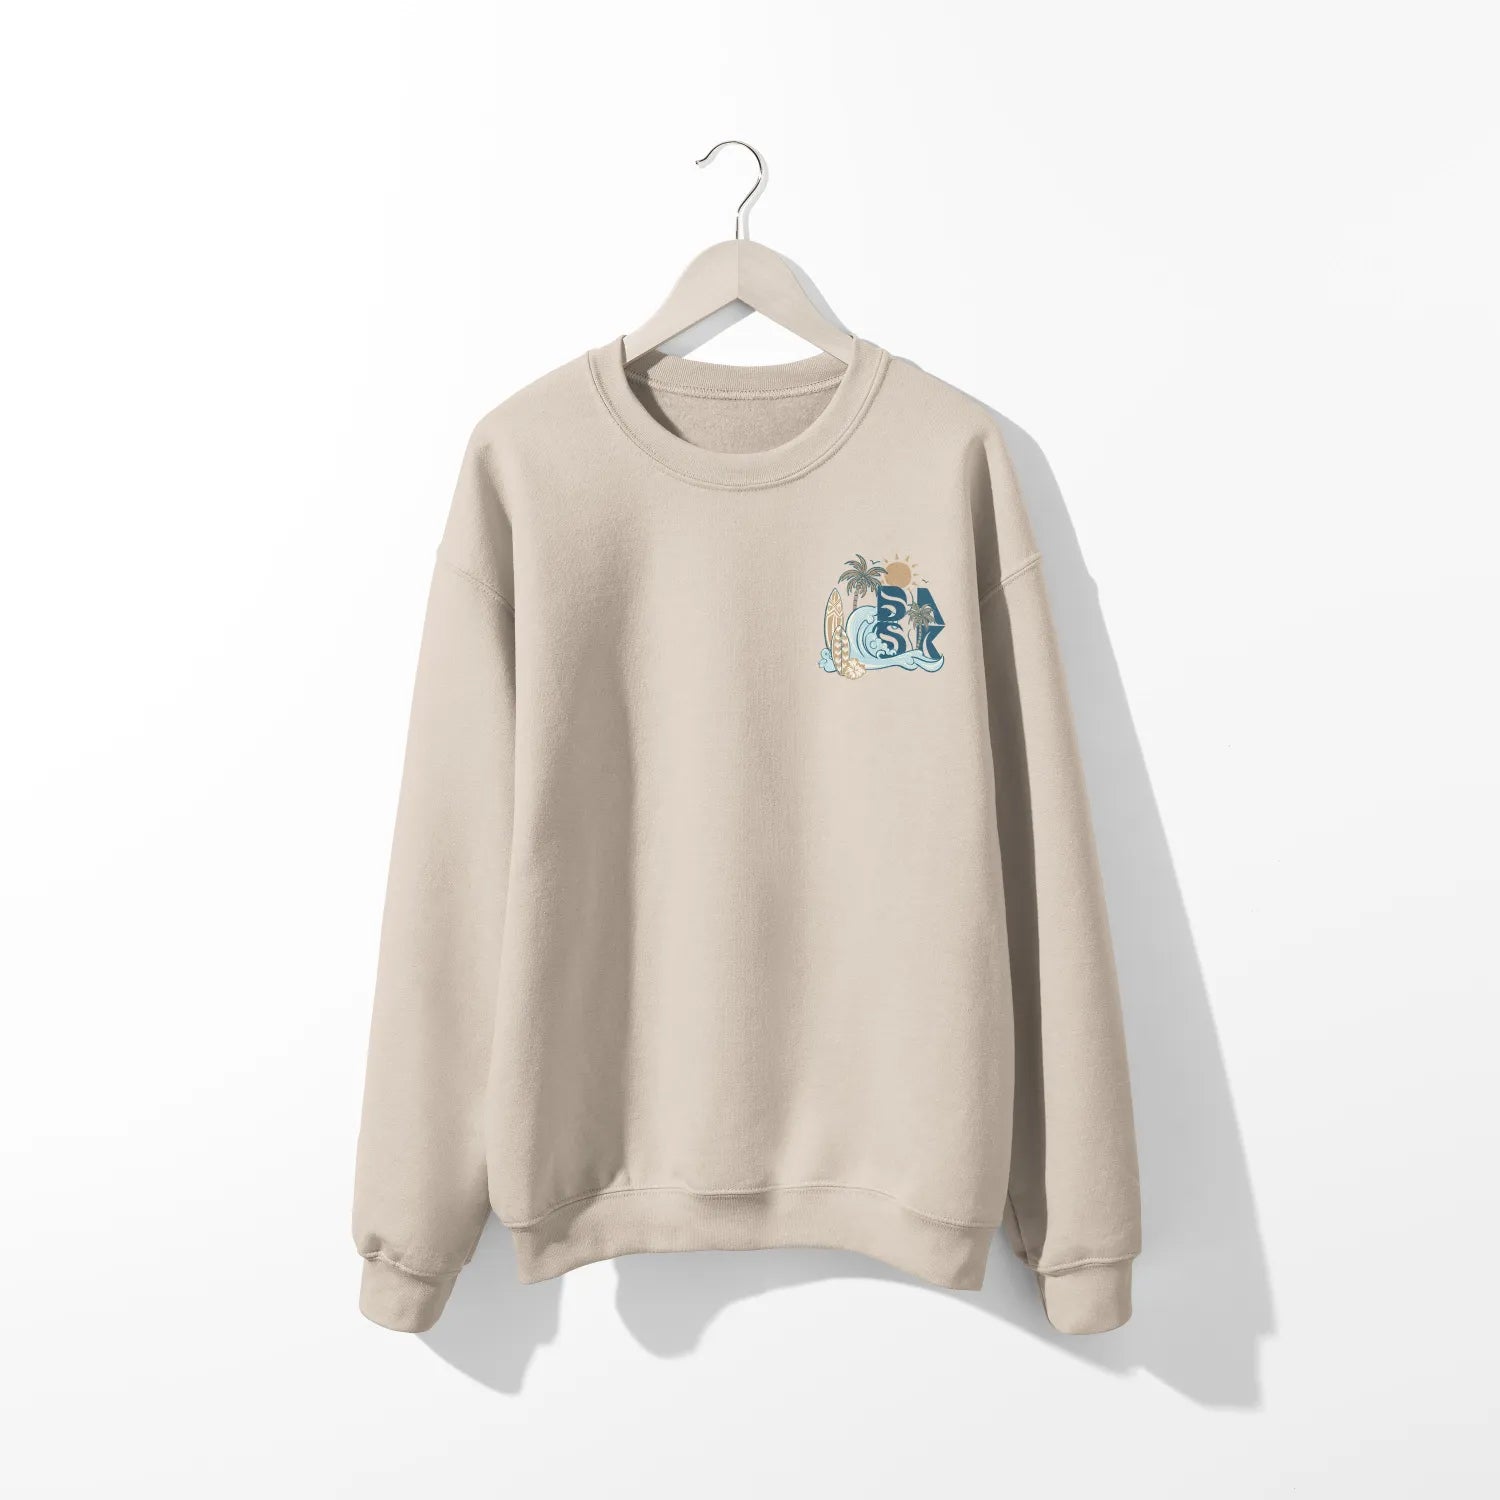 A beige Nalu o ka Mana (Waves of Faith) sweatshirt with a blue and white owl on it, featuring the Be Still and Know logo.